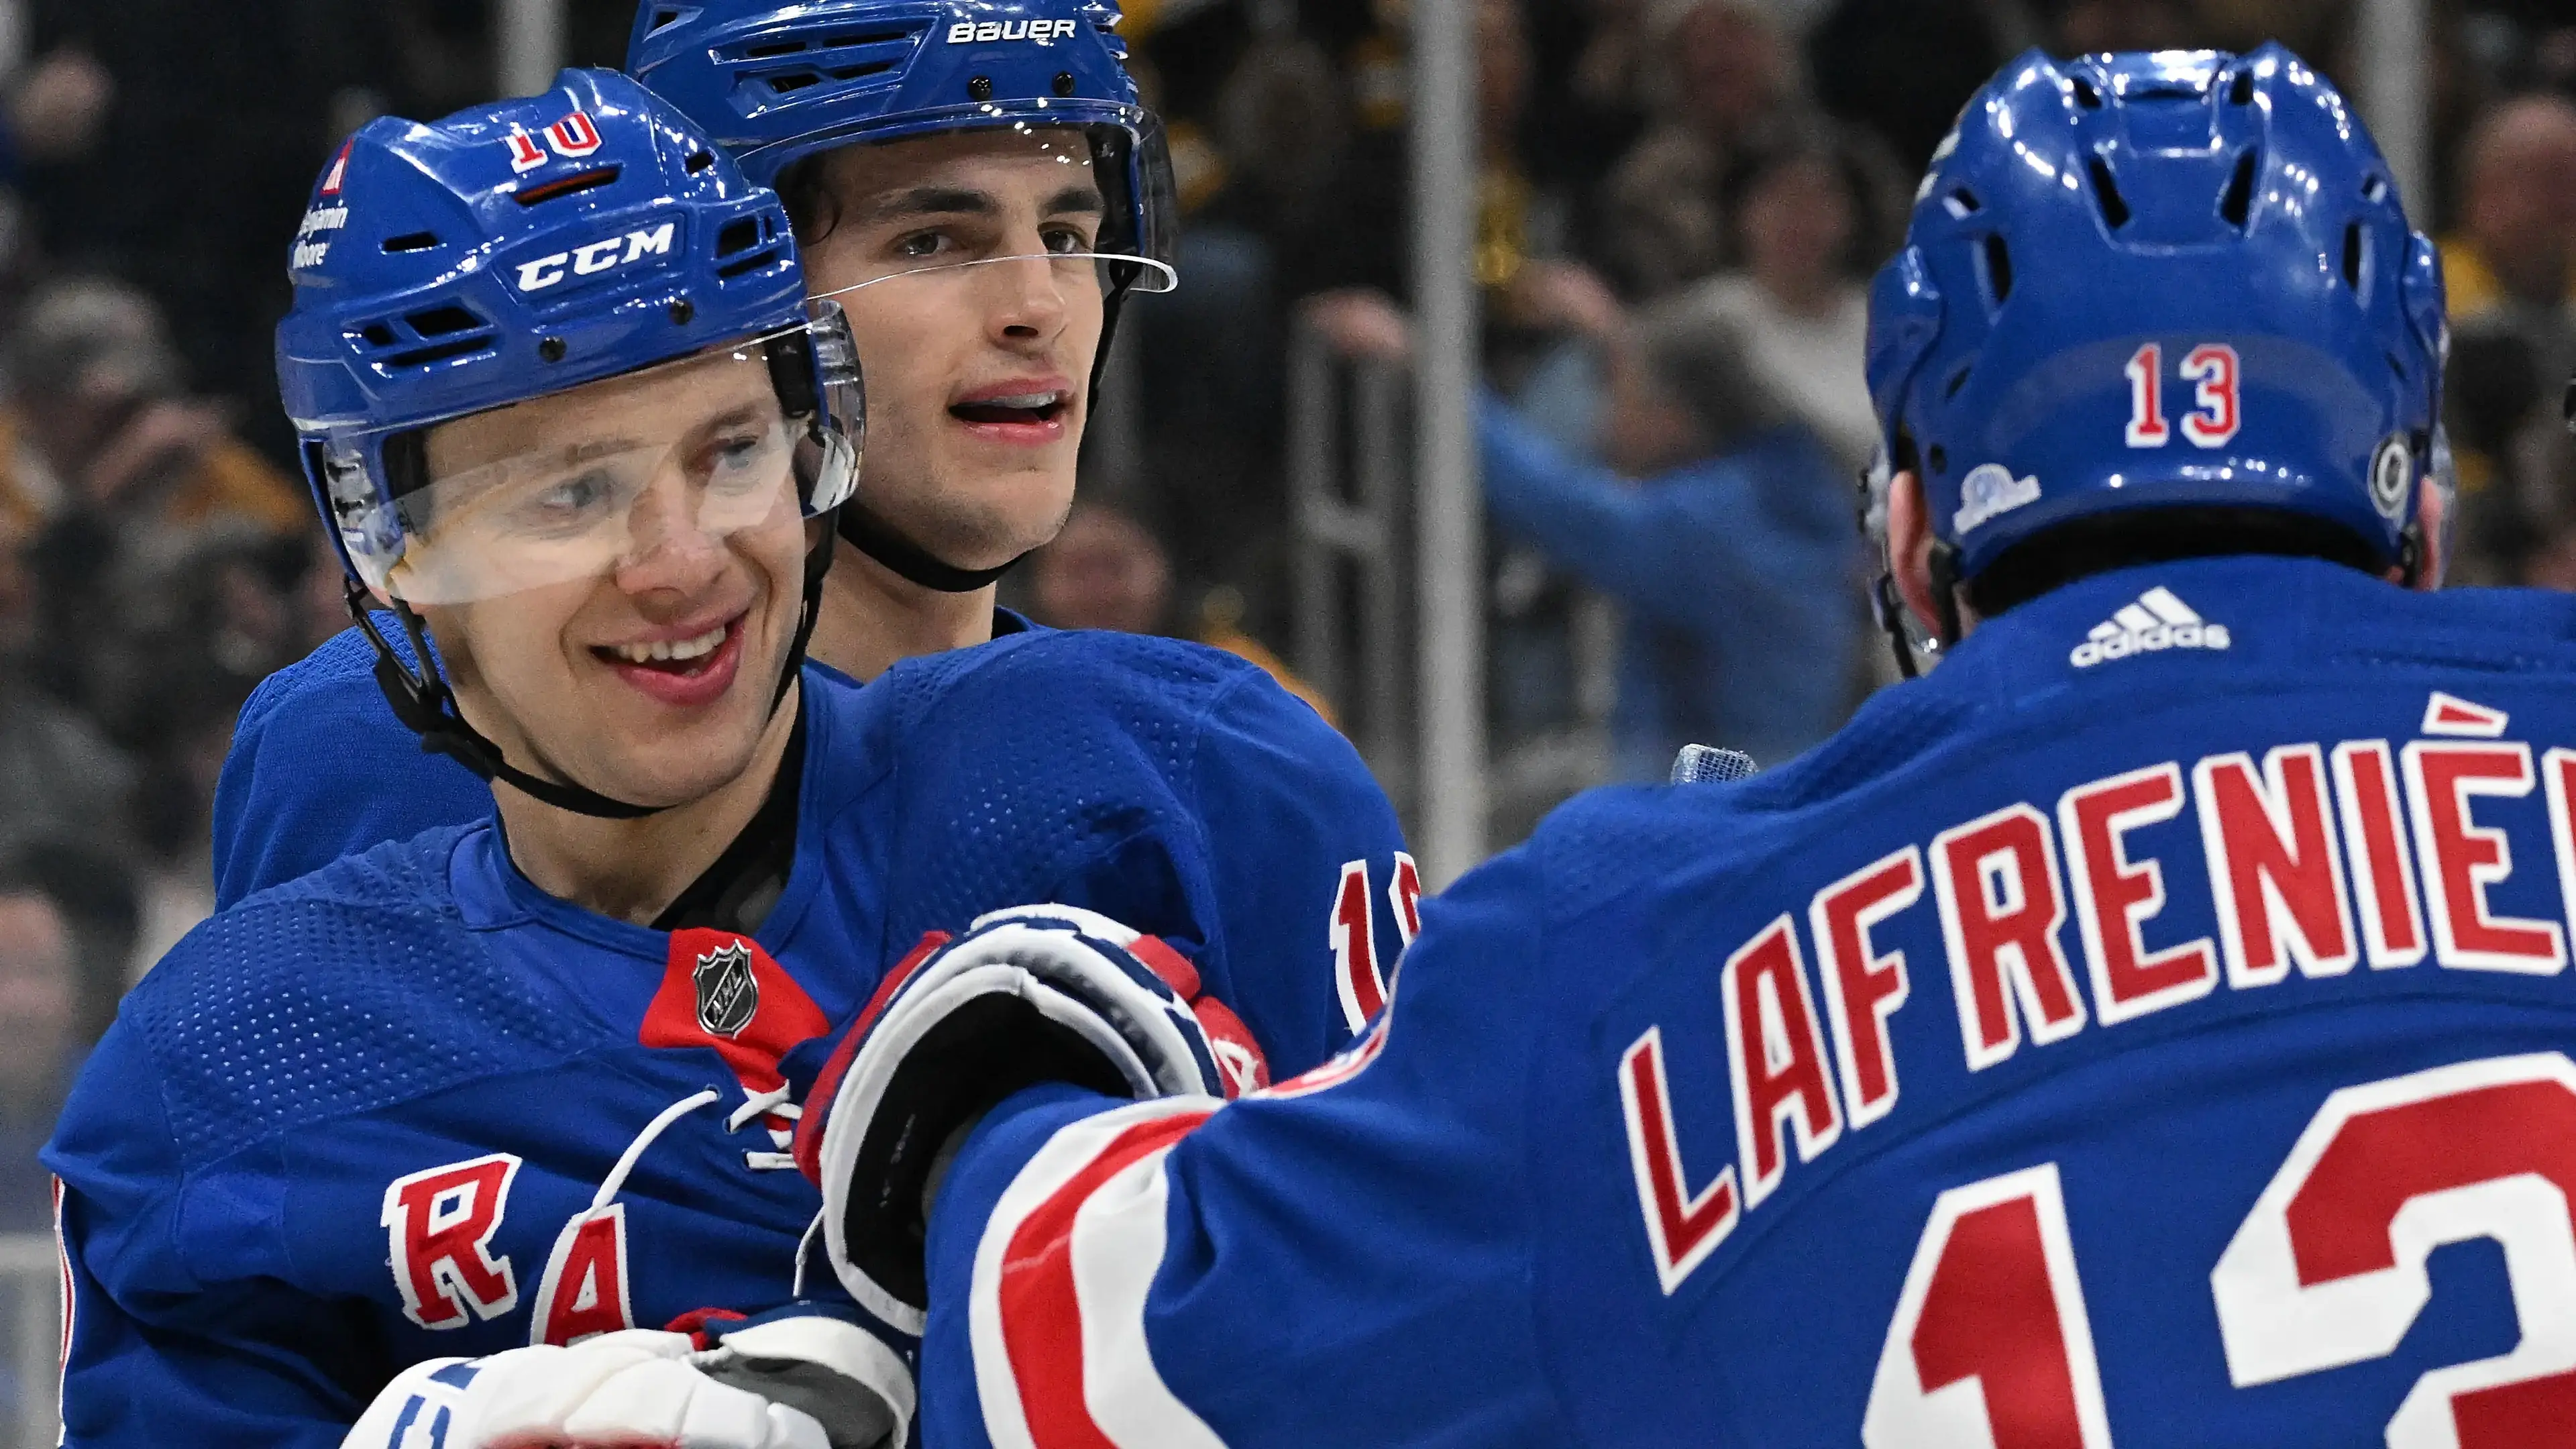 New York Rangers left wing Artemi Panarin (10) celebrates with New York Rangers left wing Alexis Lafreniere (13) after scoring a goal against the Boston Bruins during the second period at the TD Garden / Brian Fluharty - USA TODAY Sports